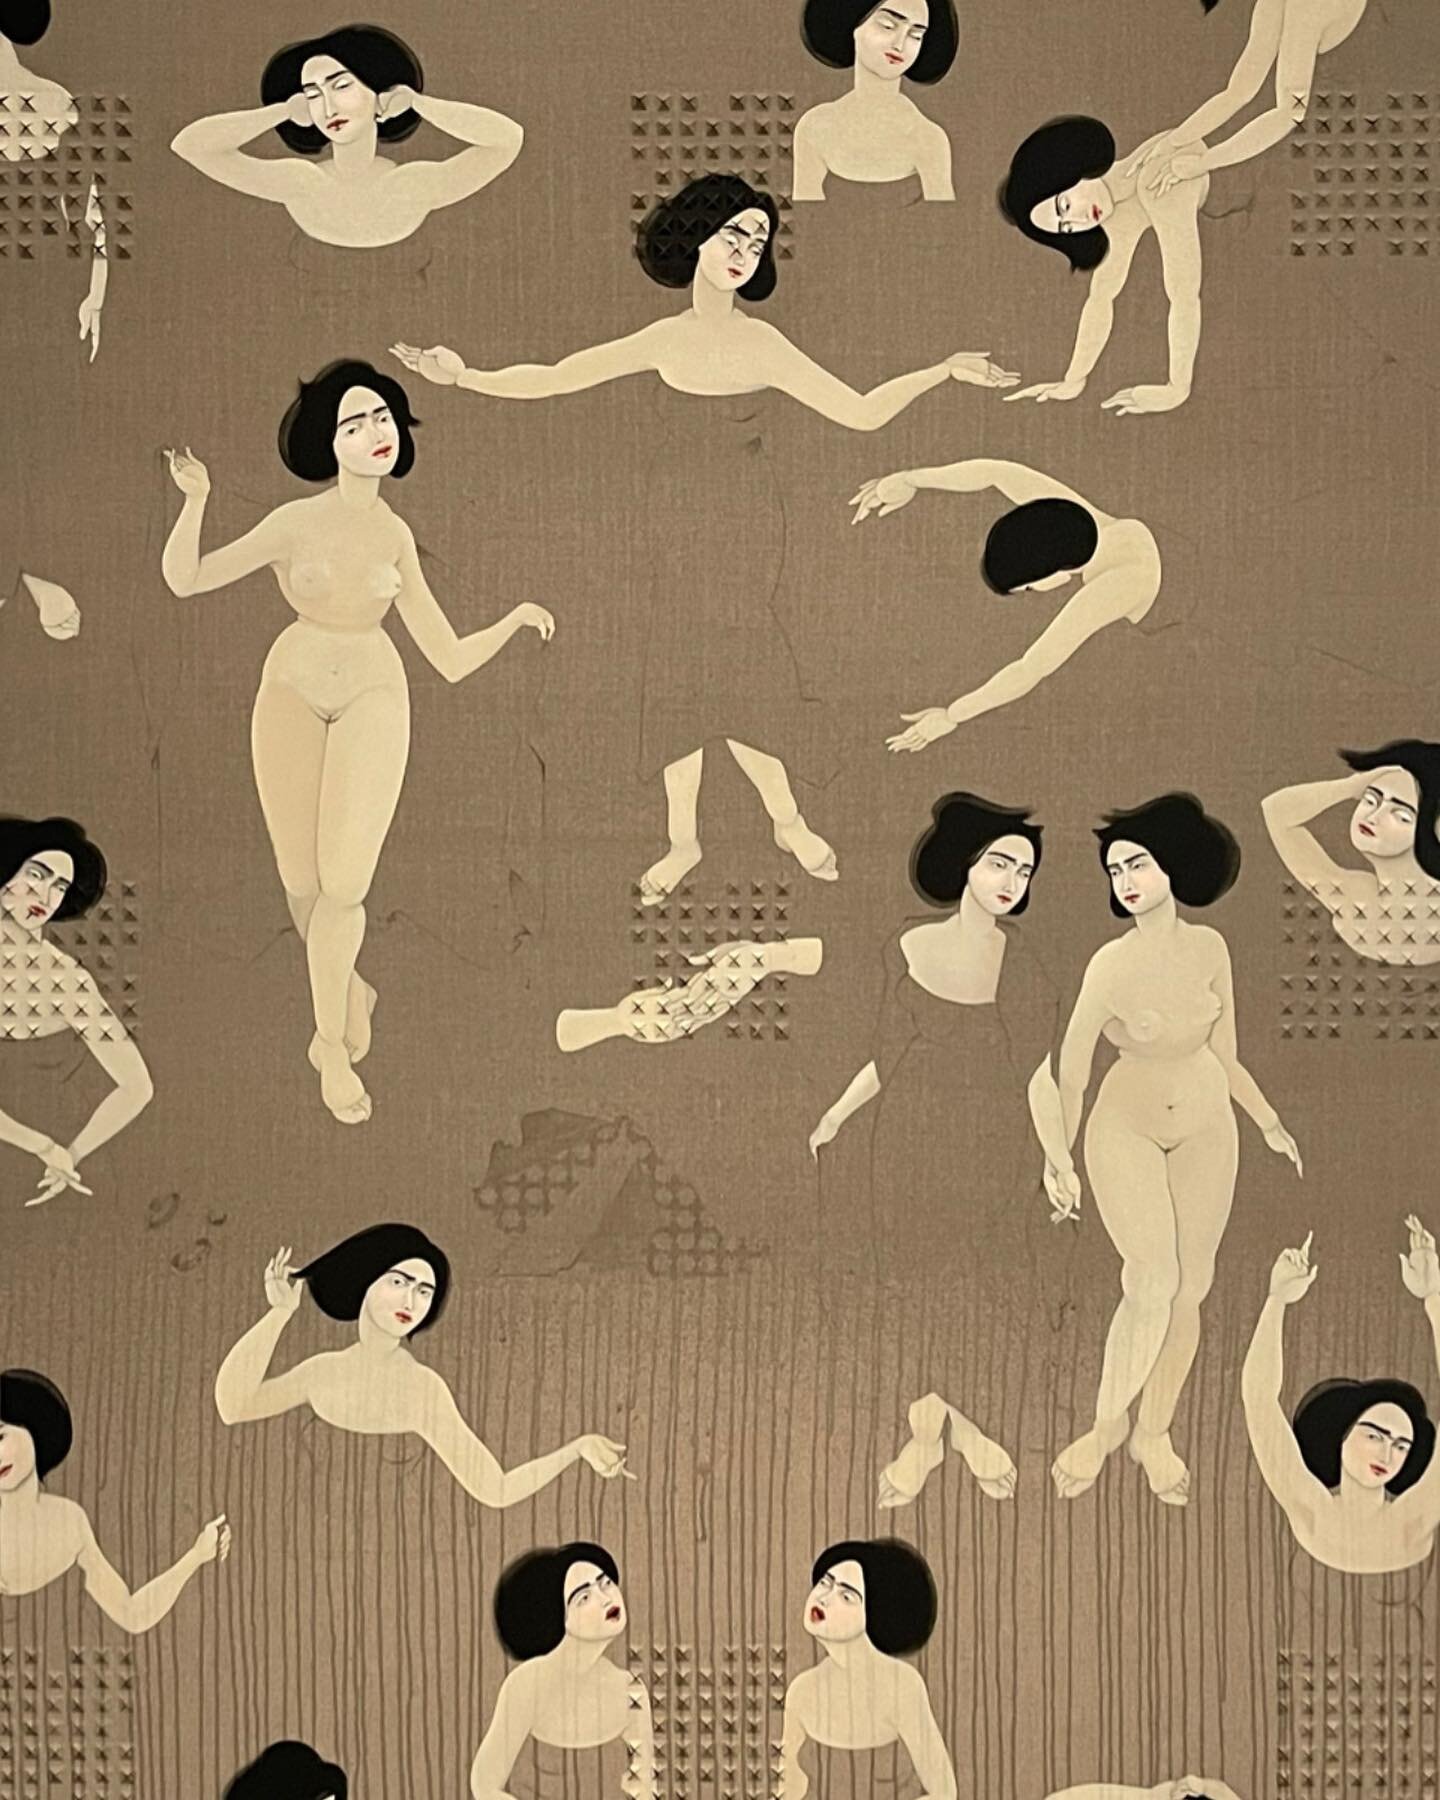 Insanely detailed paintings and drawing by the talented, Hayv Kahraman,  from the &ldquo;Women defining Women&rdquo; show at Lacma. Her work stood out a mile above the rest.